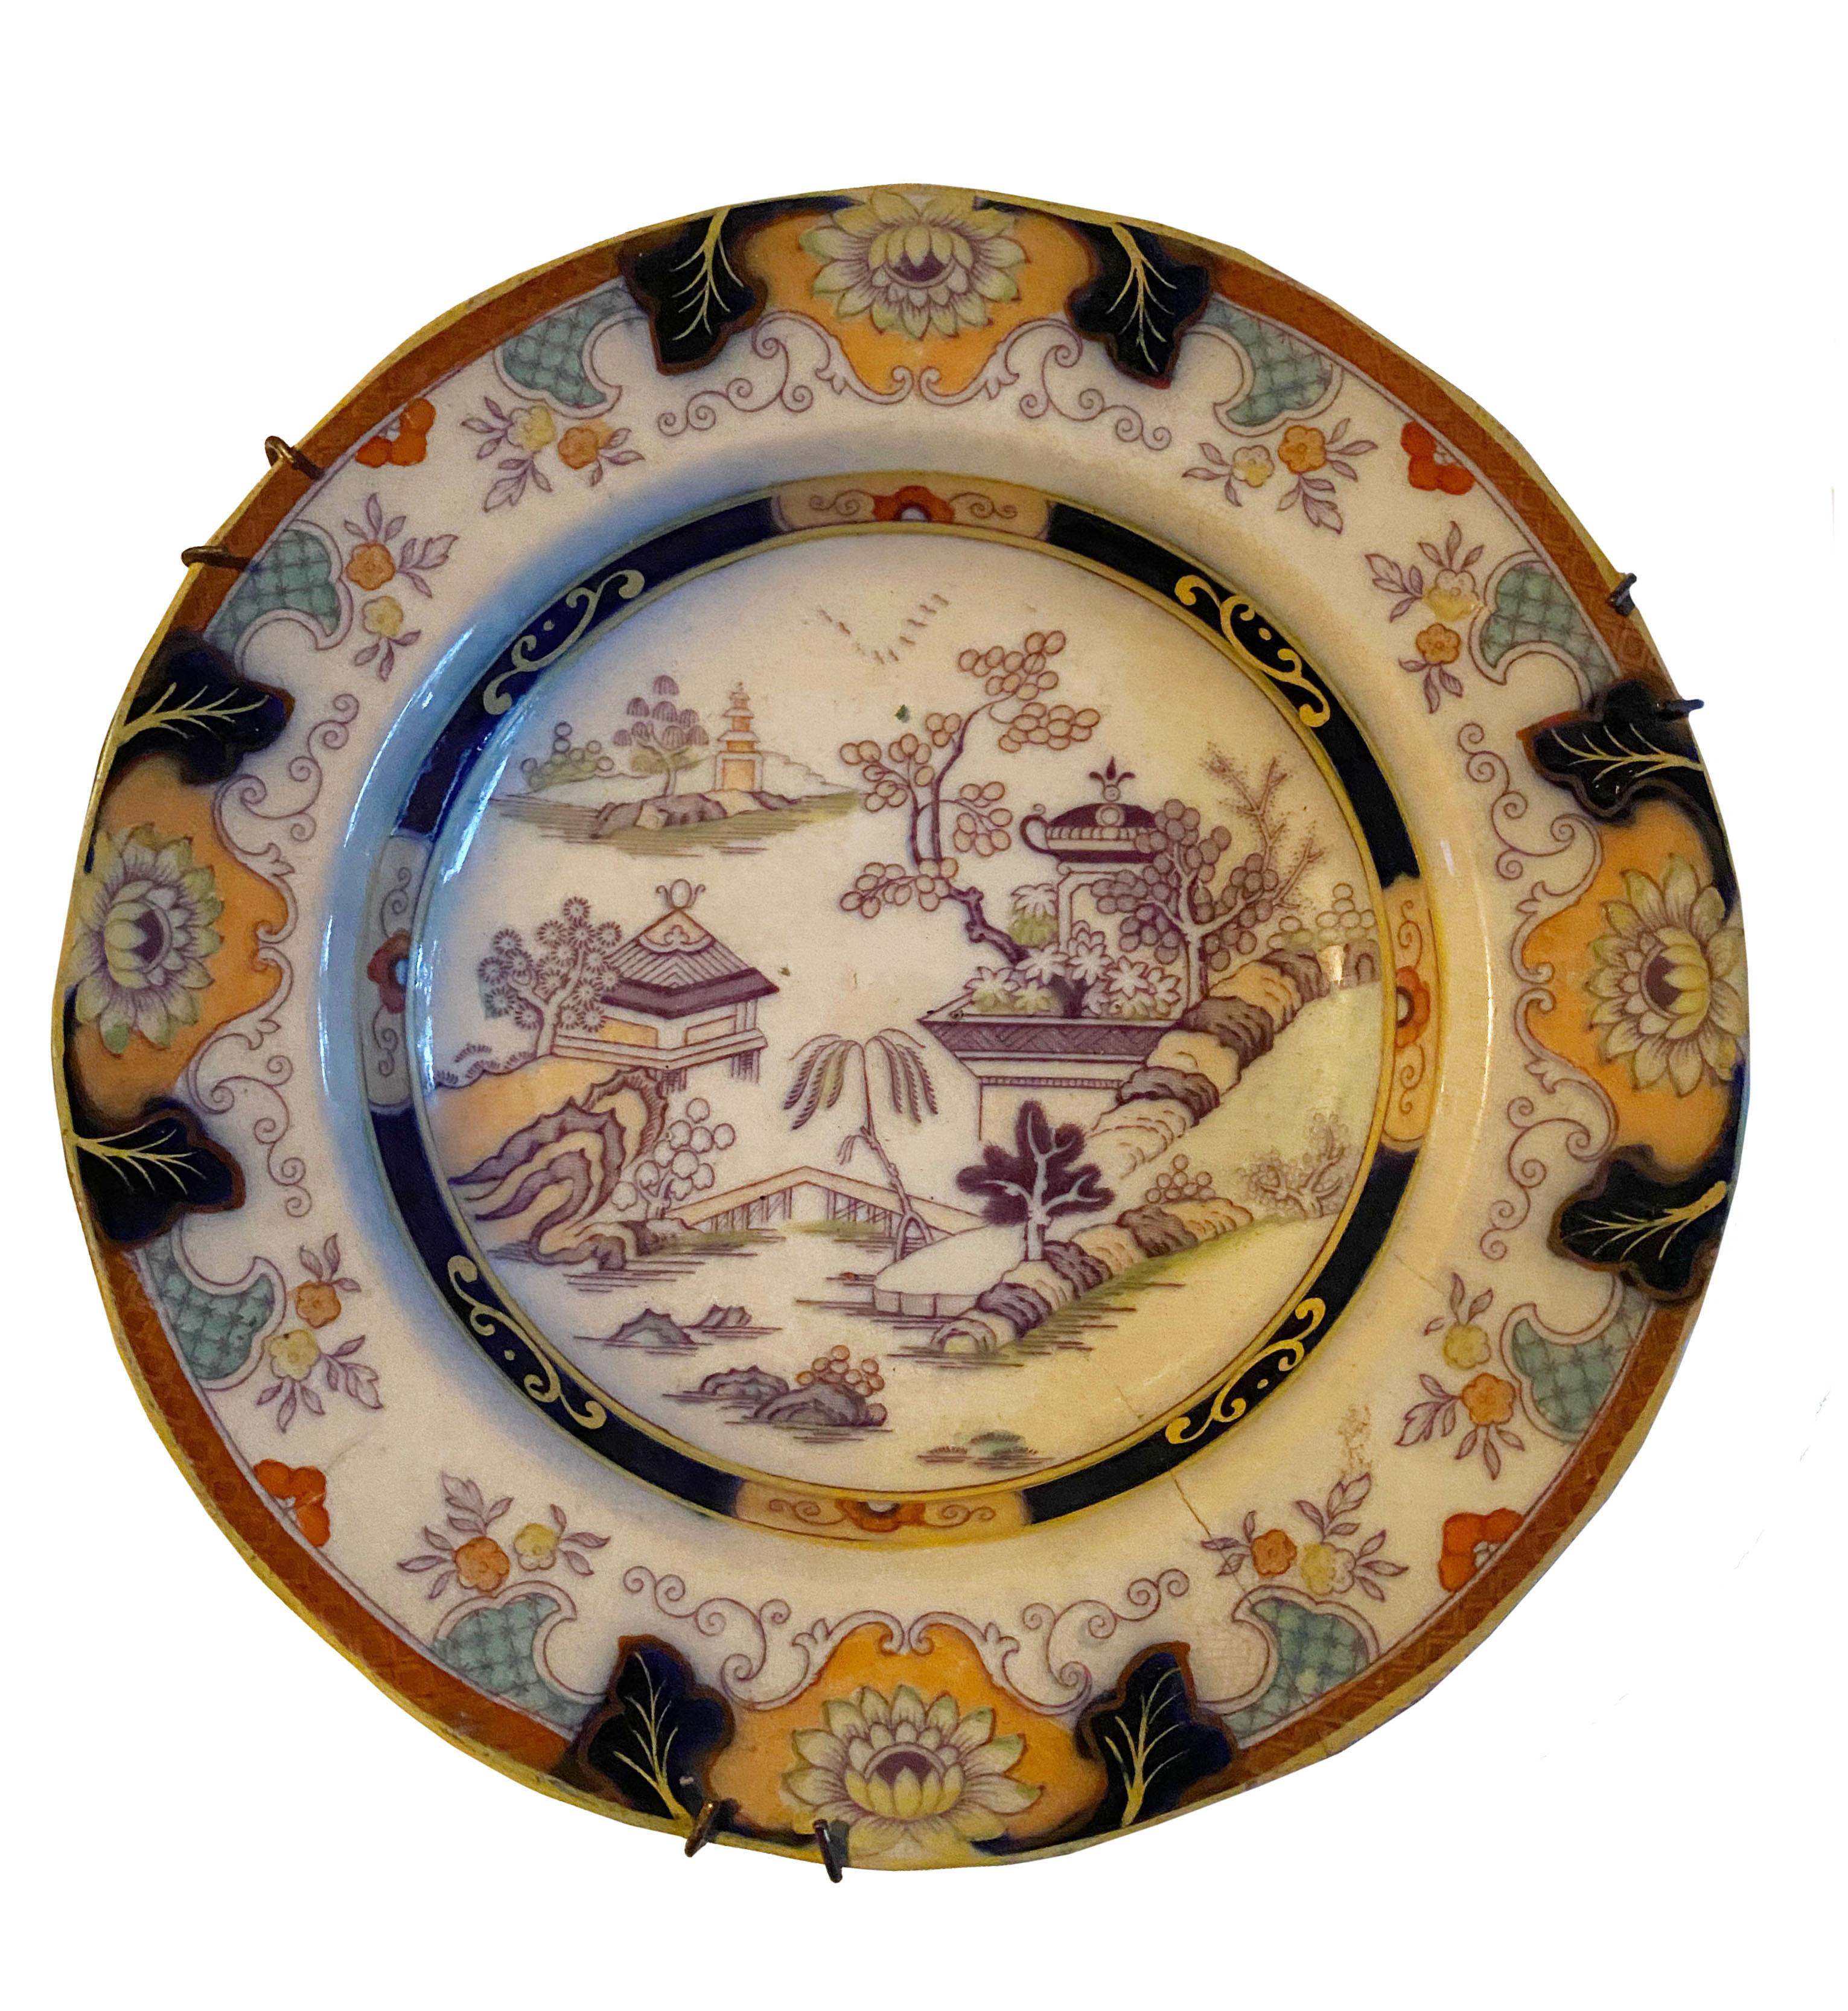 A pair of Tongzhi Period (1862-1874) Chinese polychrome plates. Dated on the reverse 1873. Beautiful muted colors in these plates. With wall hangers.